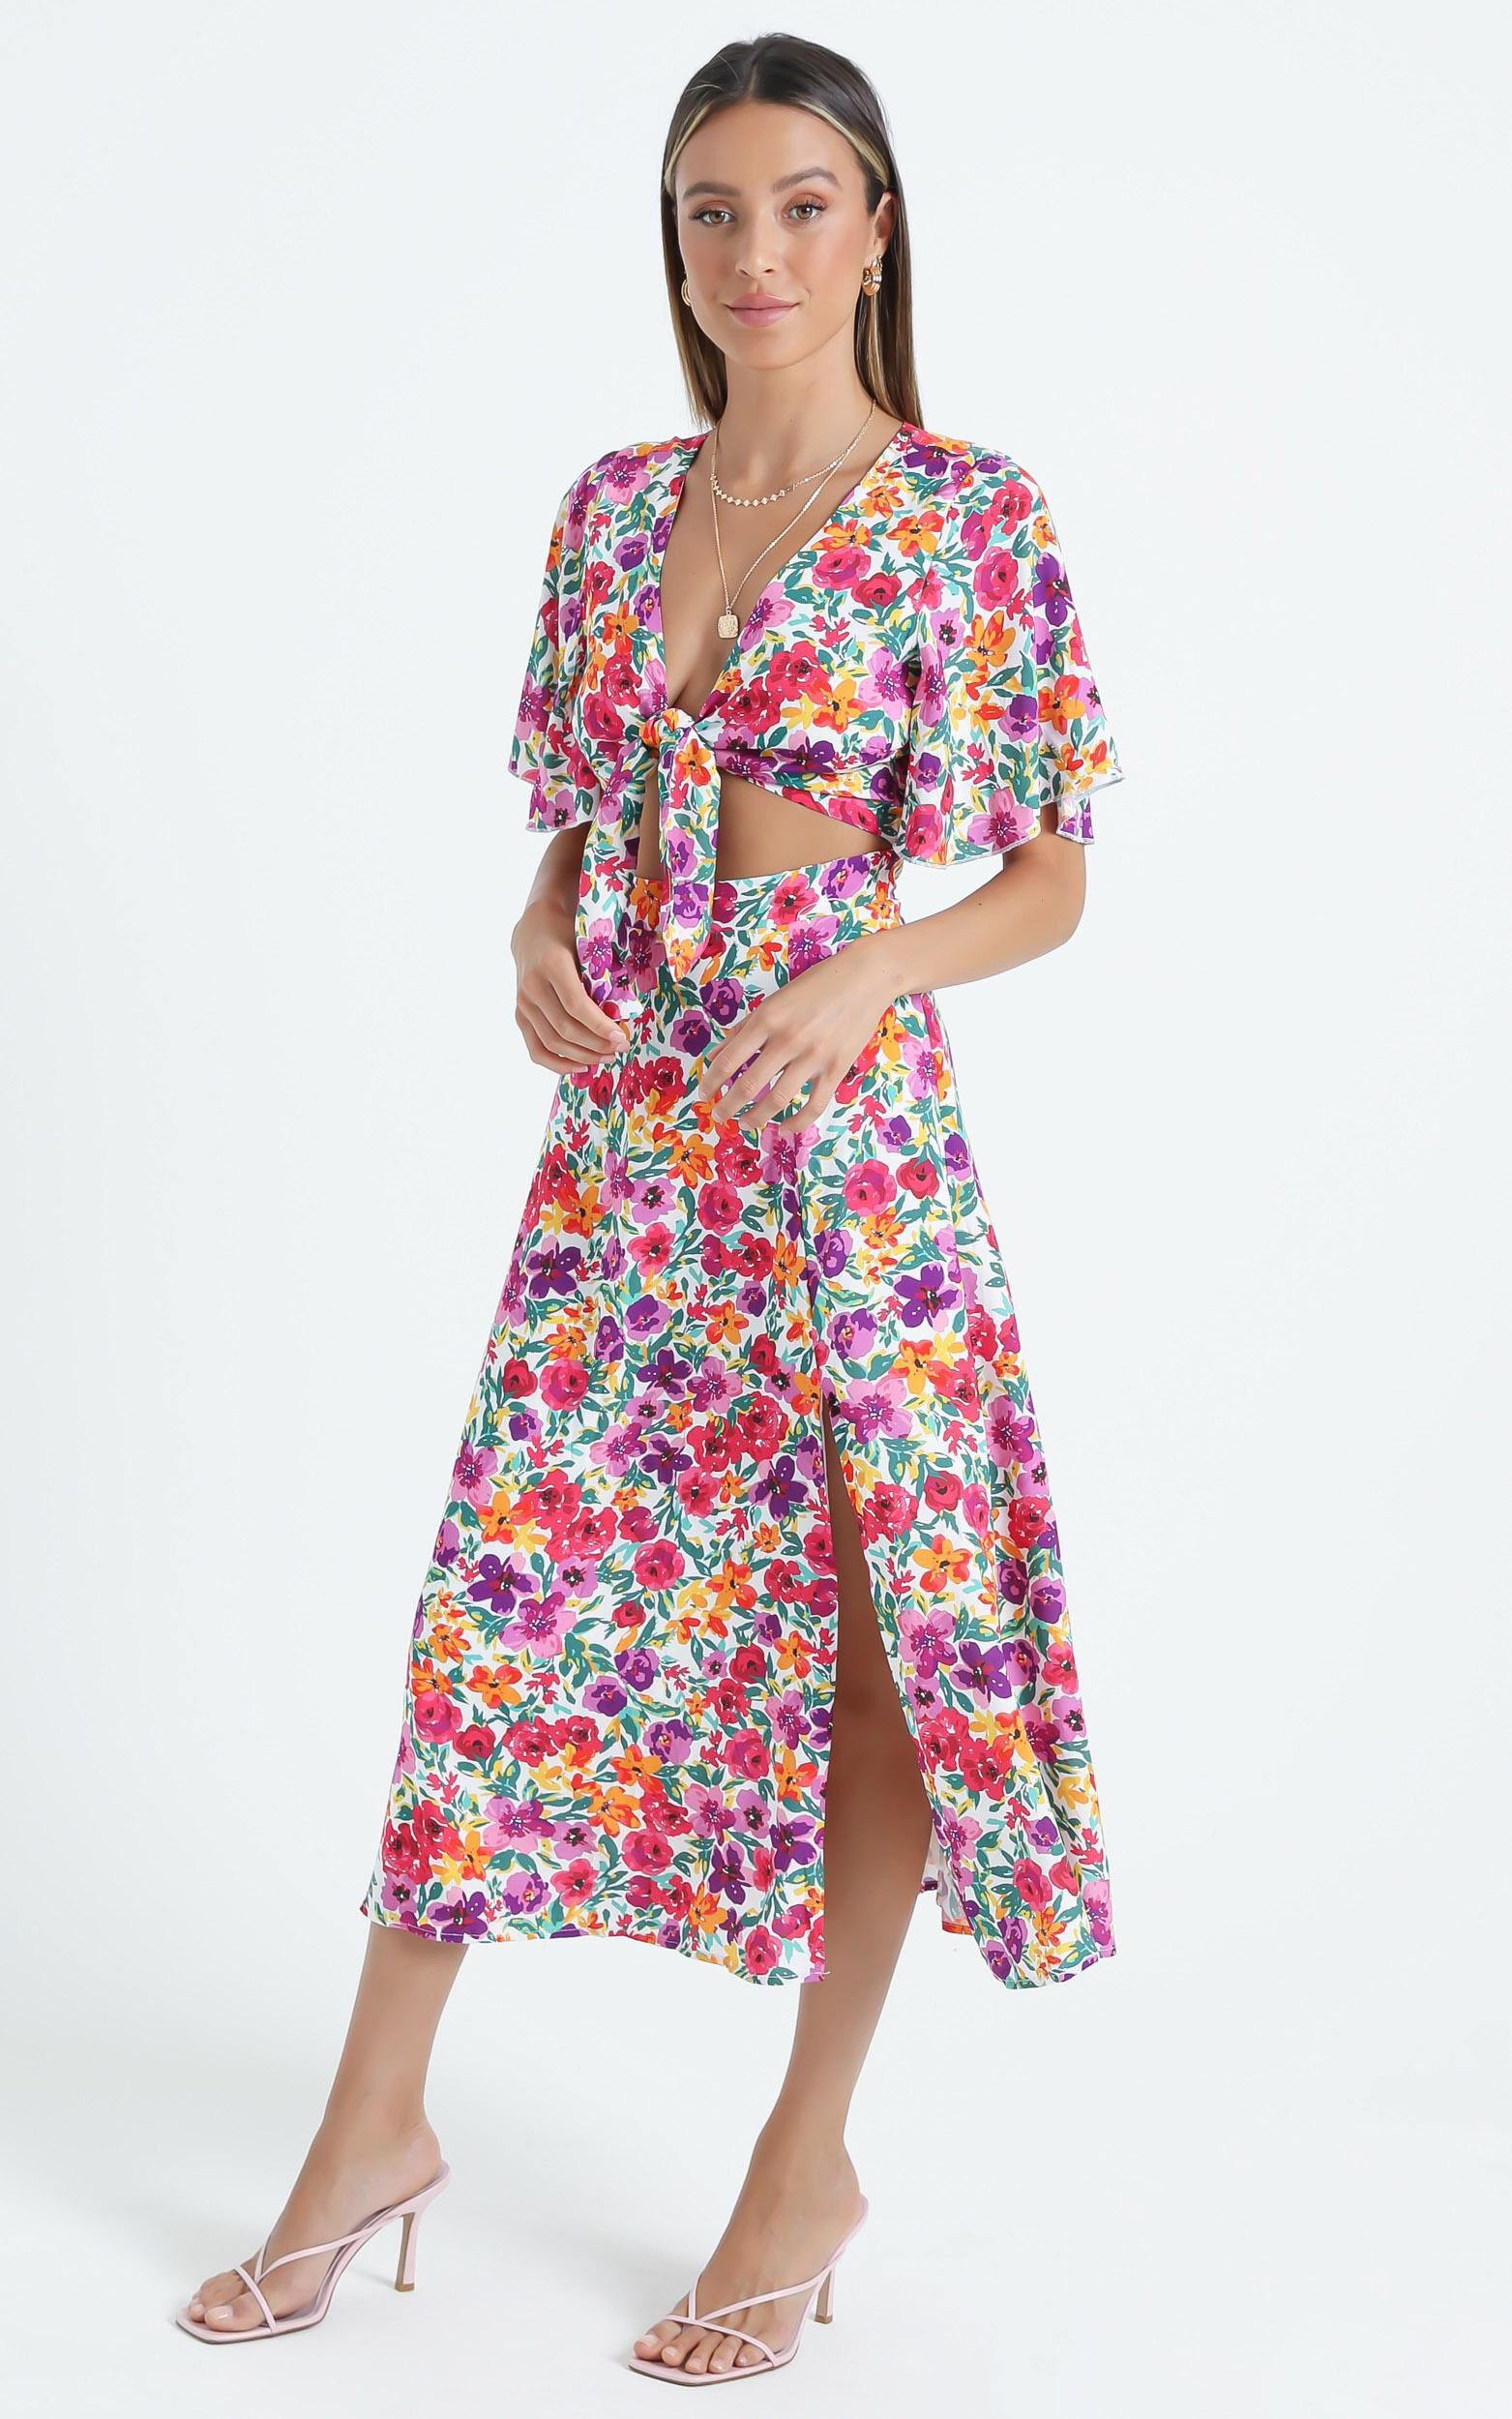 Freda Dress in Packed Floral | Showpo USA